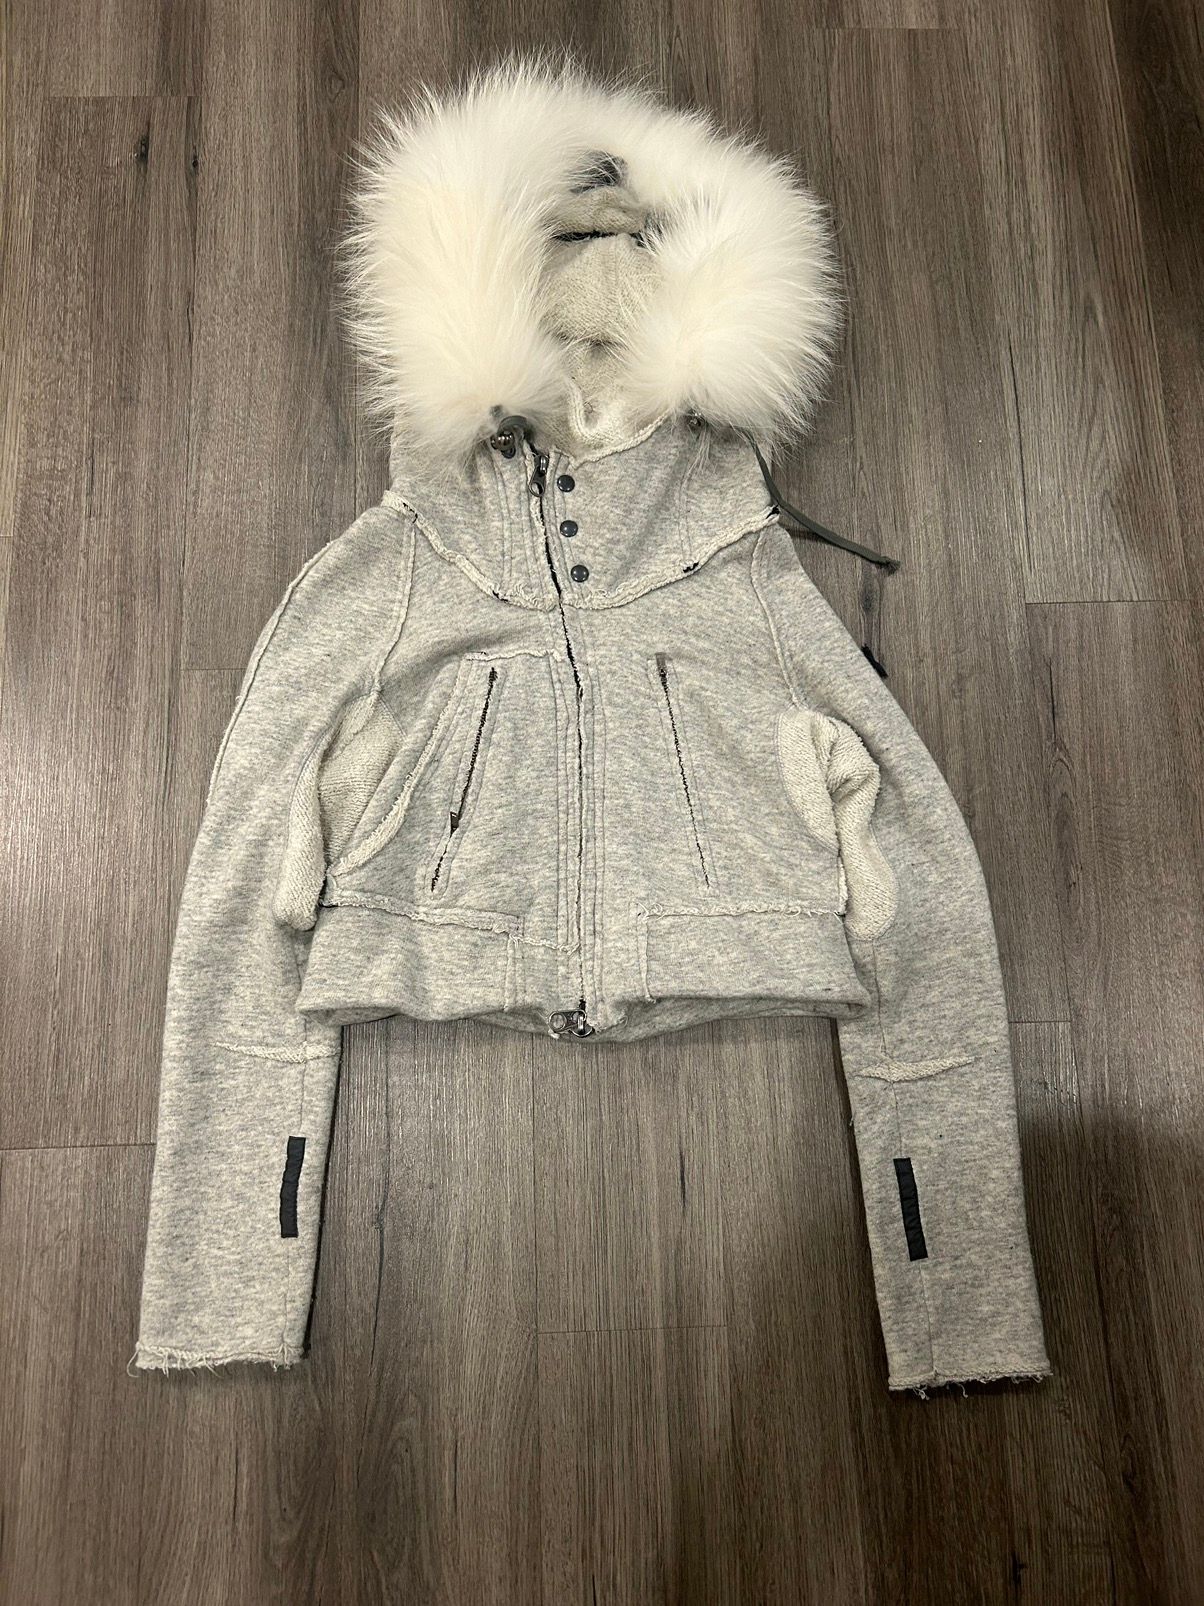 Pre-owned If Six Was Nine X Le Grande Bleu L G B No Paypal Angora Fur Jacket!! In Grey